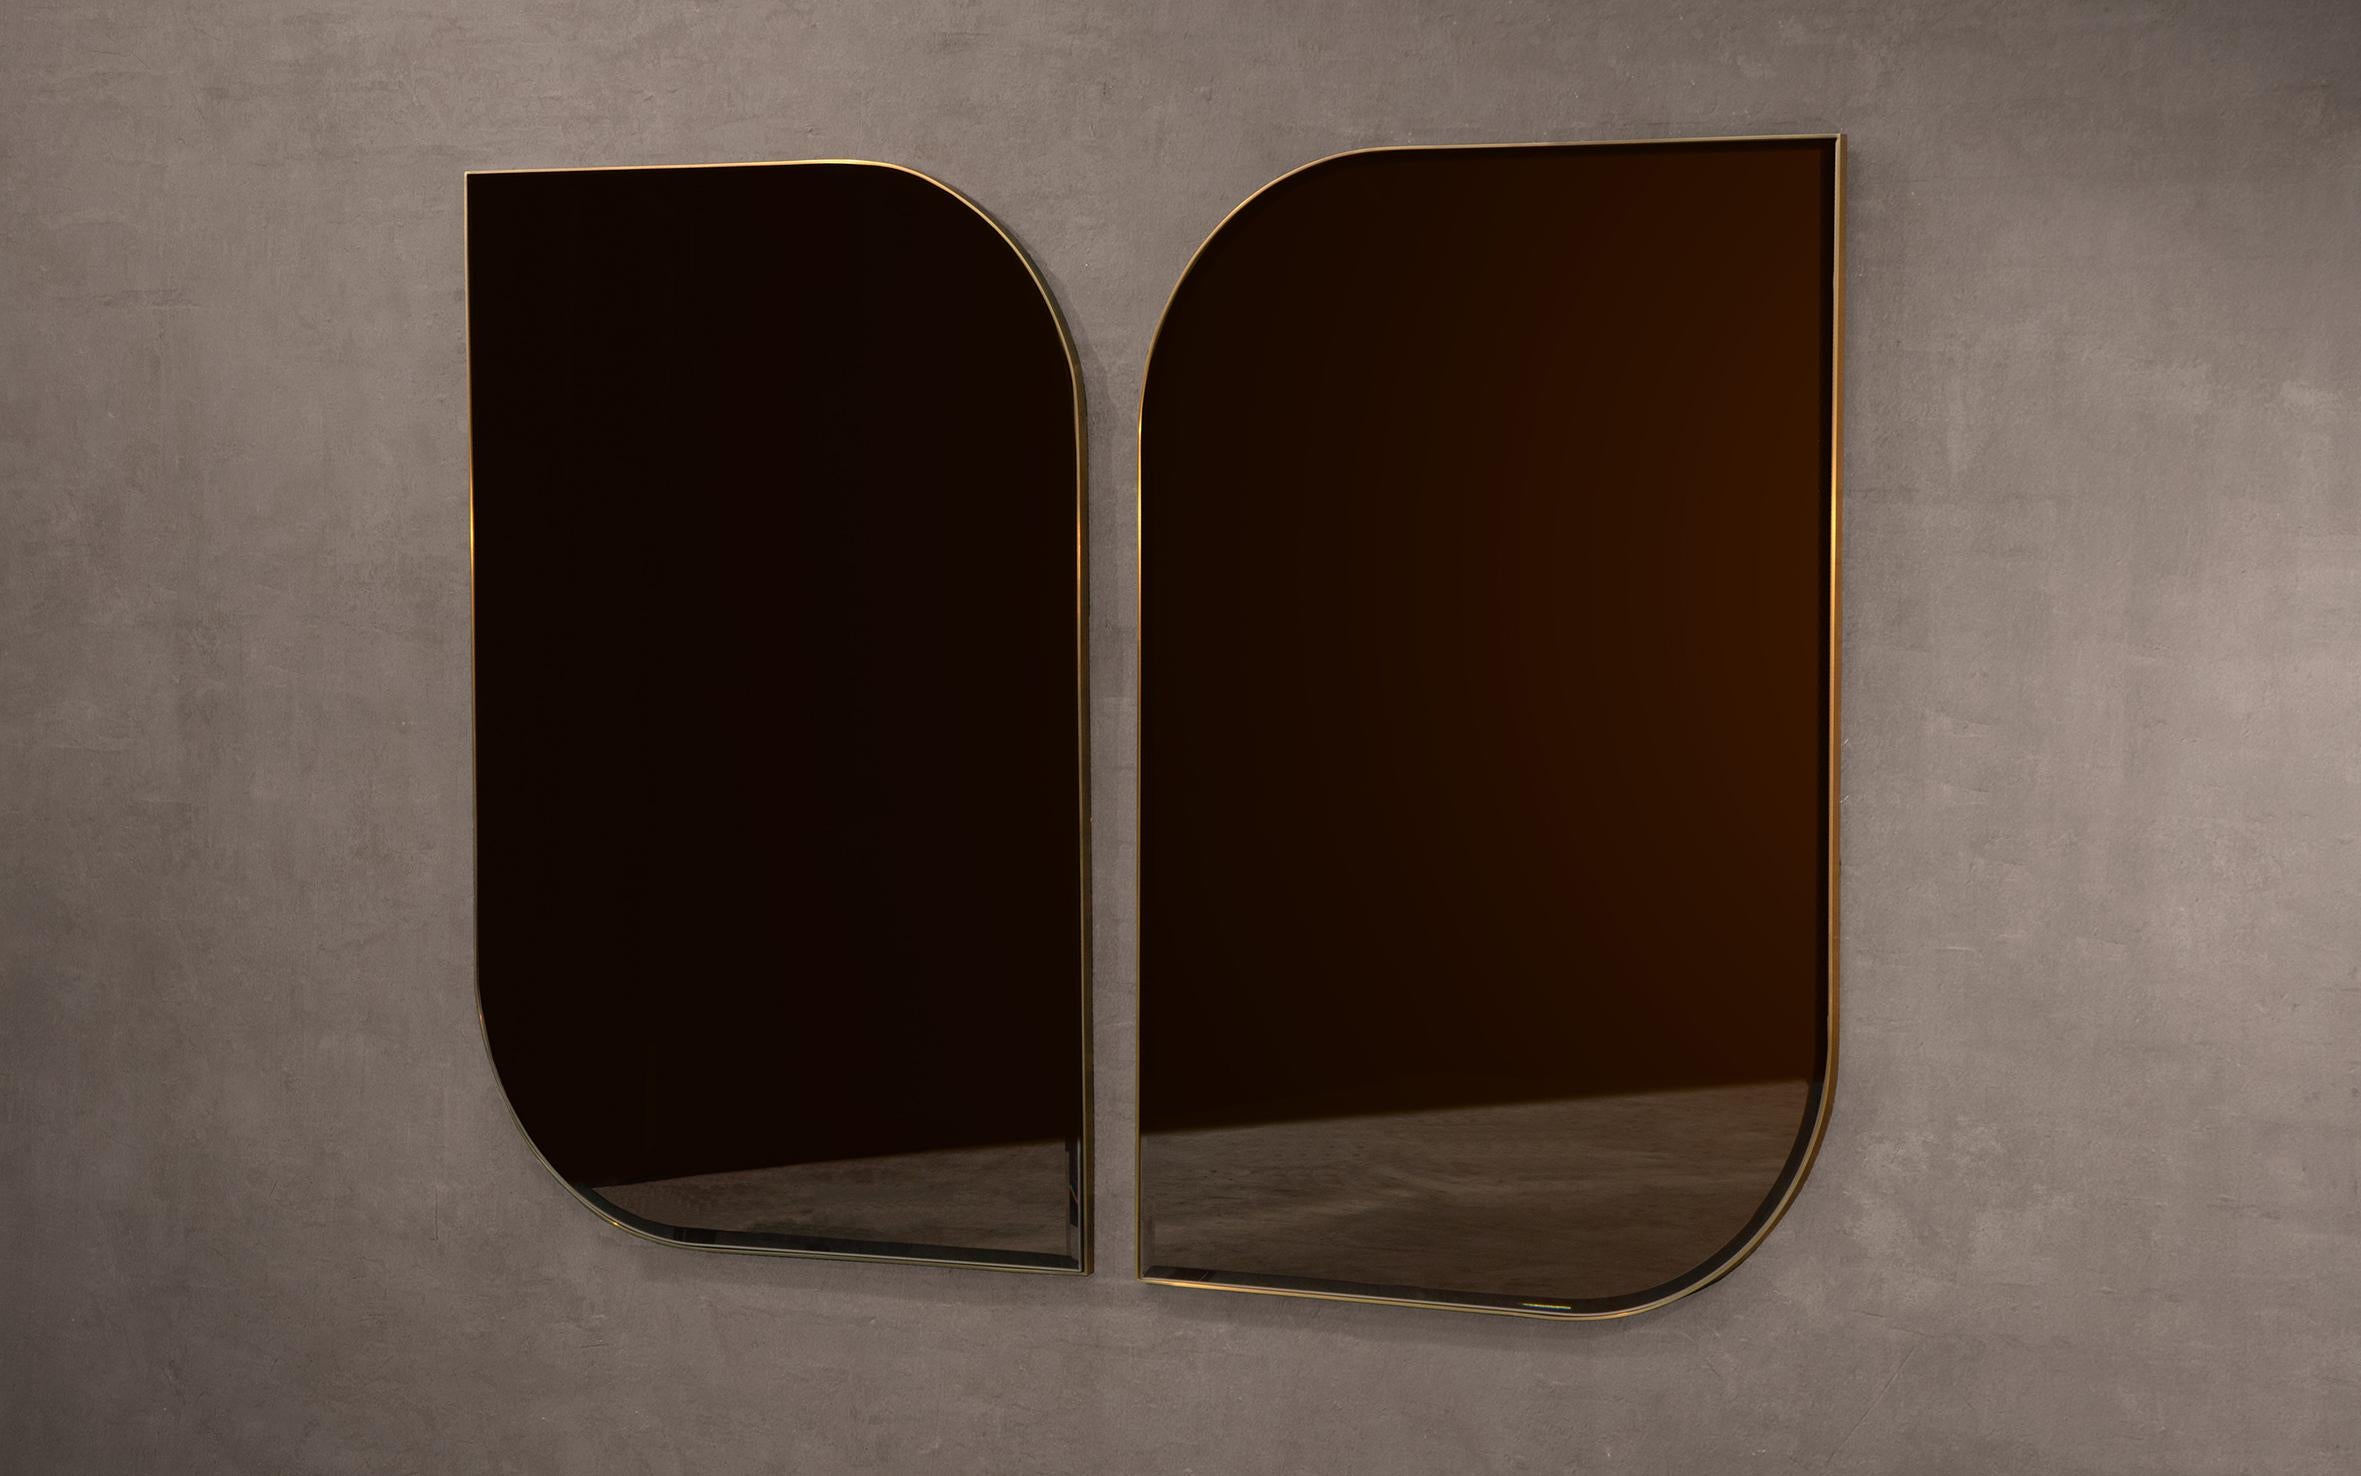 A handcrafted wall mirror in blackened steel and beveled, bronze tinted glass. Available in left and right handed options for the opportunity of pairing two together.

Can be hung in both portrait and landscape orientations. Supplied with two